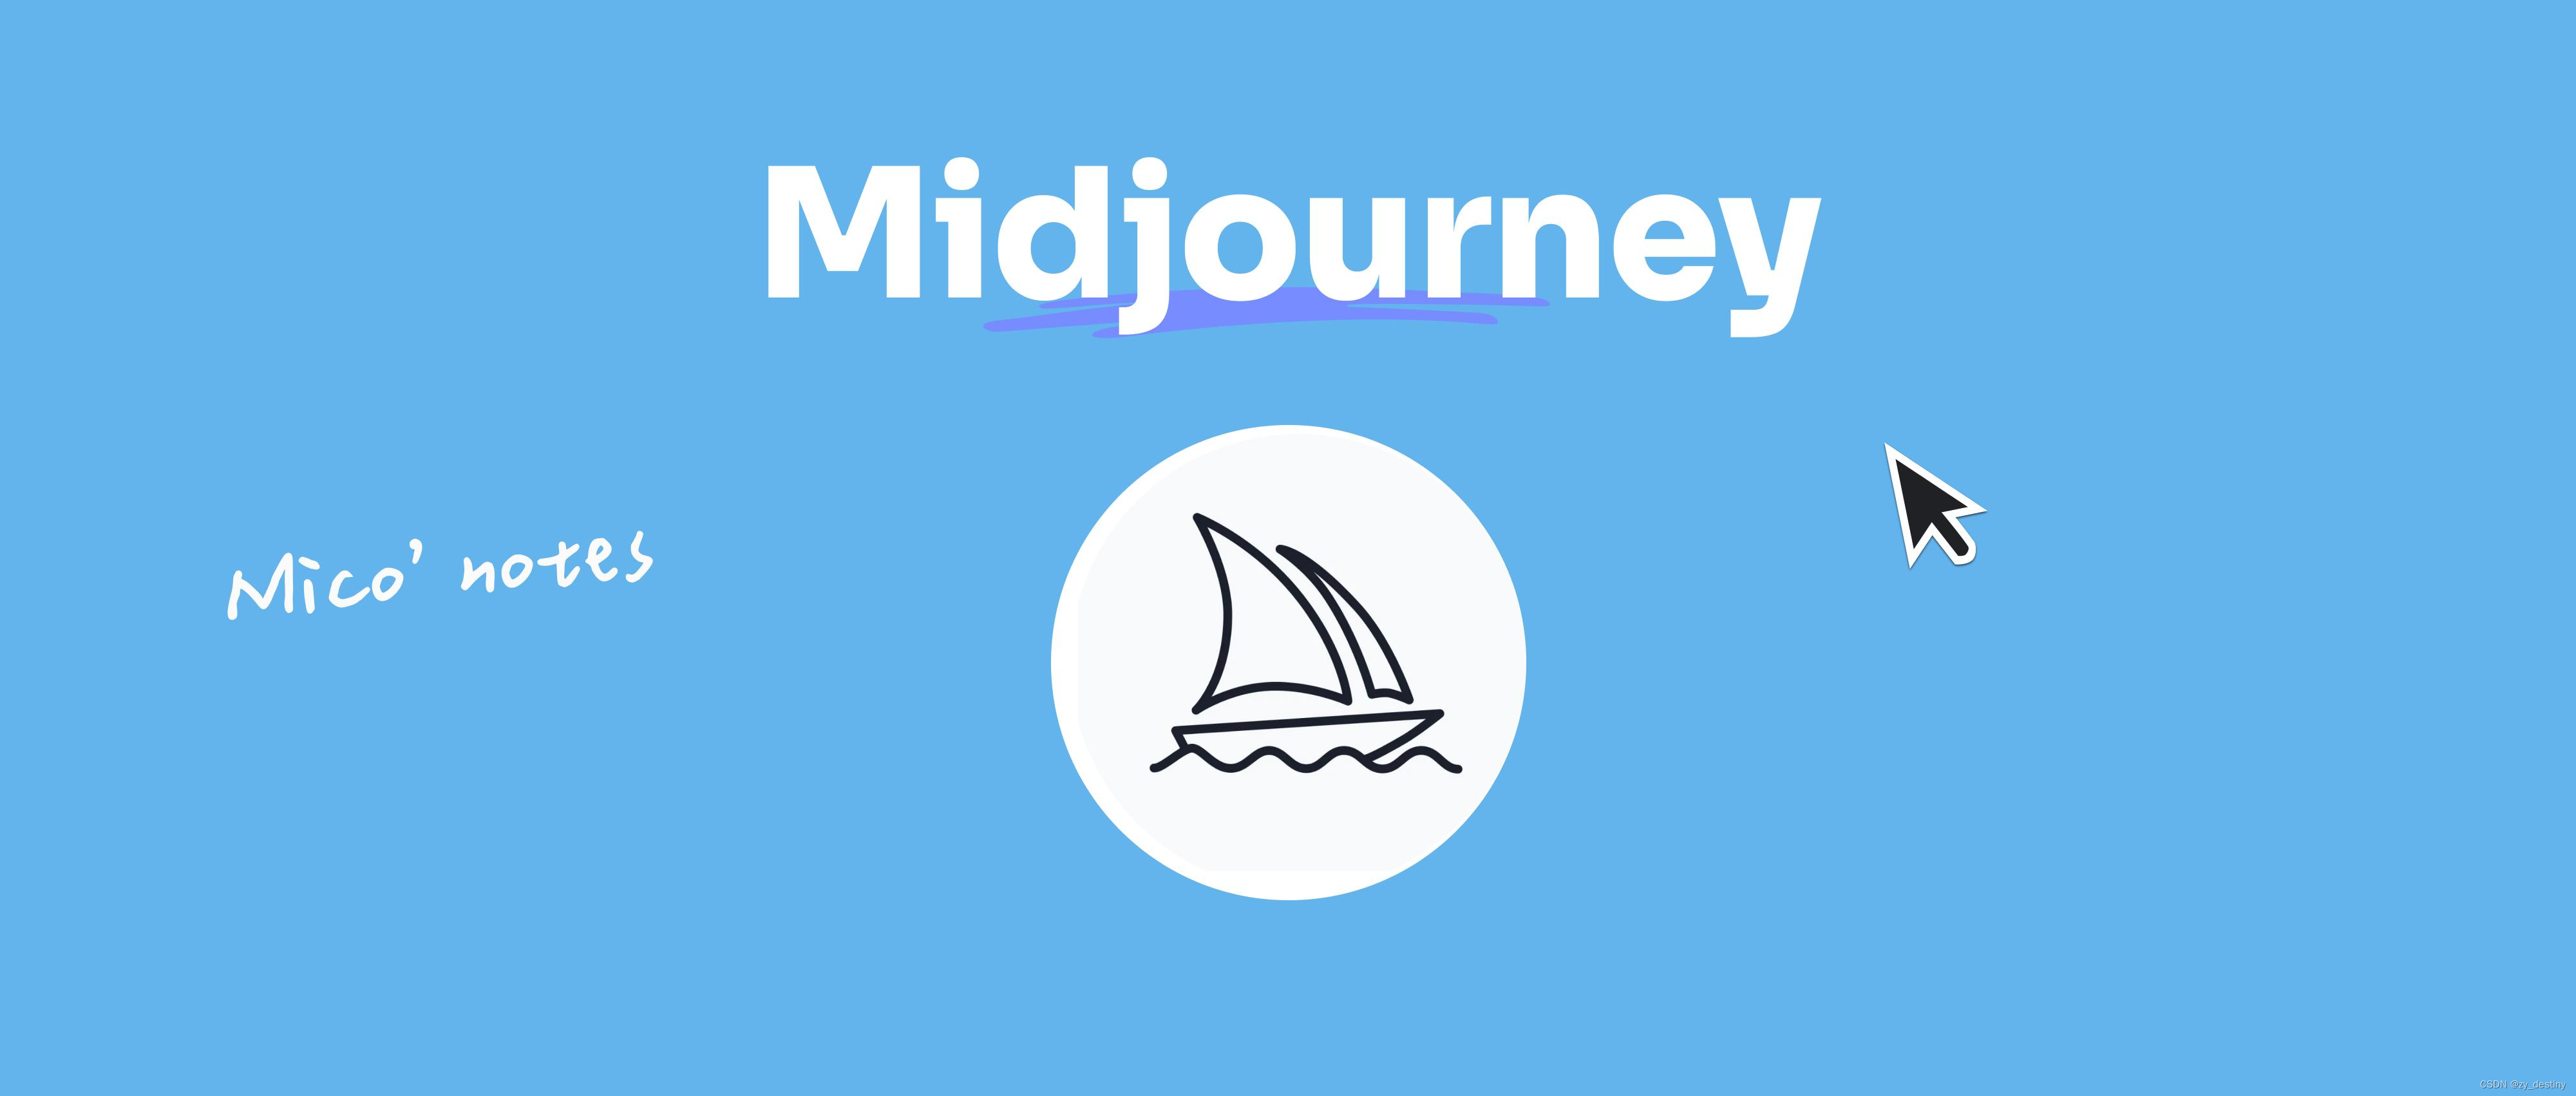 【<span style='color:red;'>Midjourney</span>】<span style='color:red;'>Midjourney</span>根据prompt提示词<span style='color:red;'>生成</span>黑白色<span style='color:red;'>图片</span>